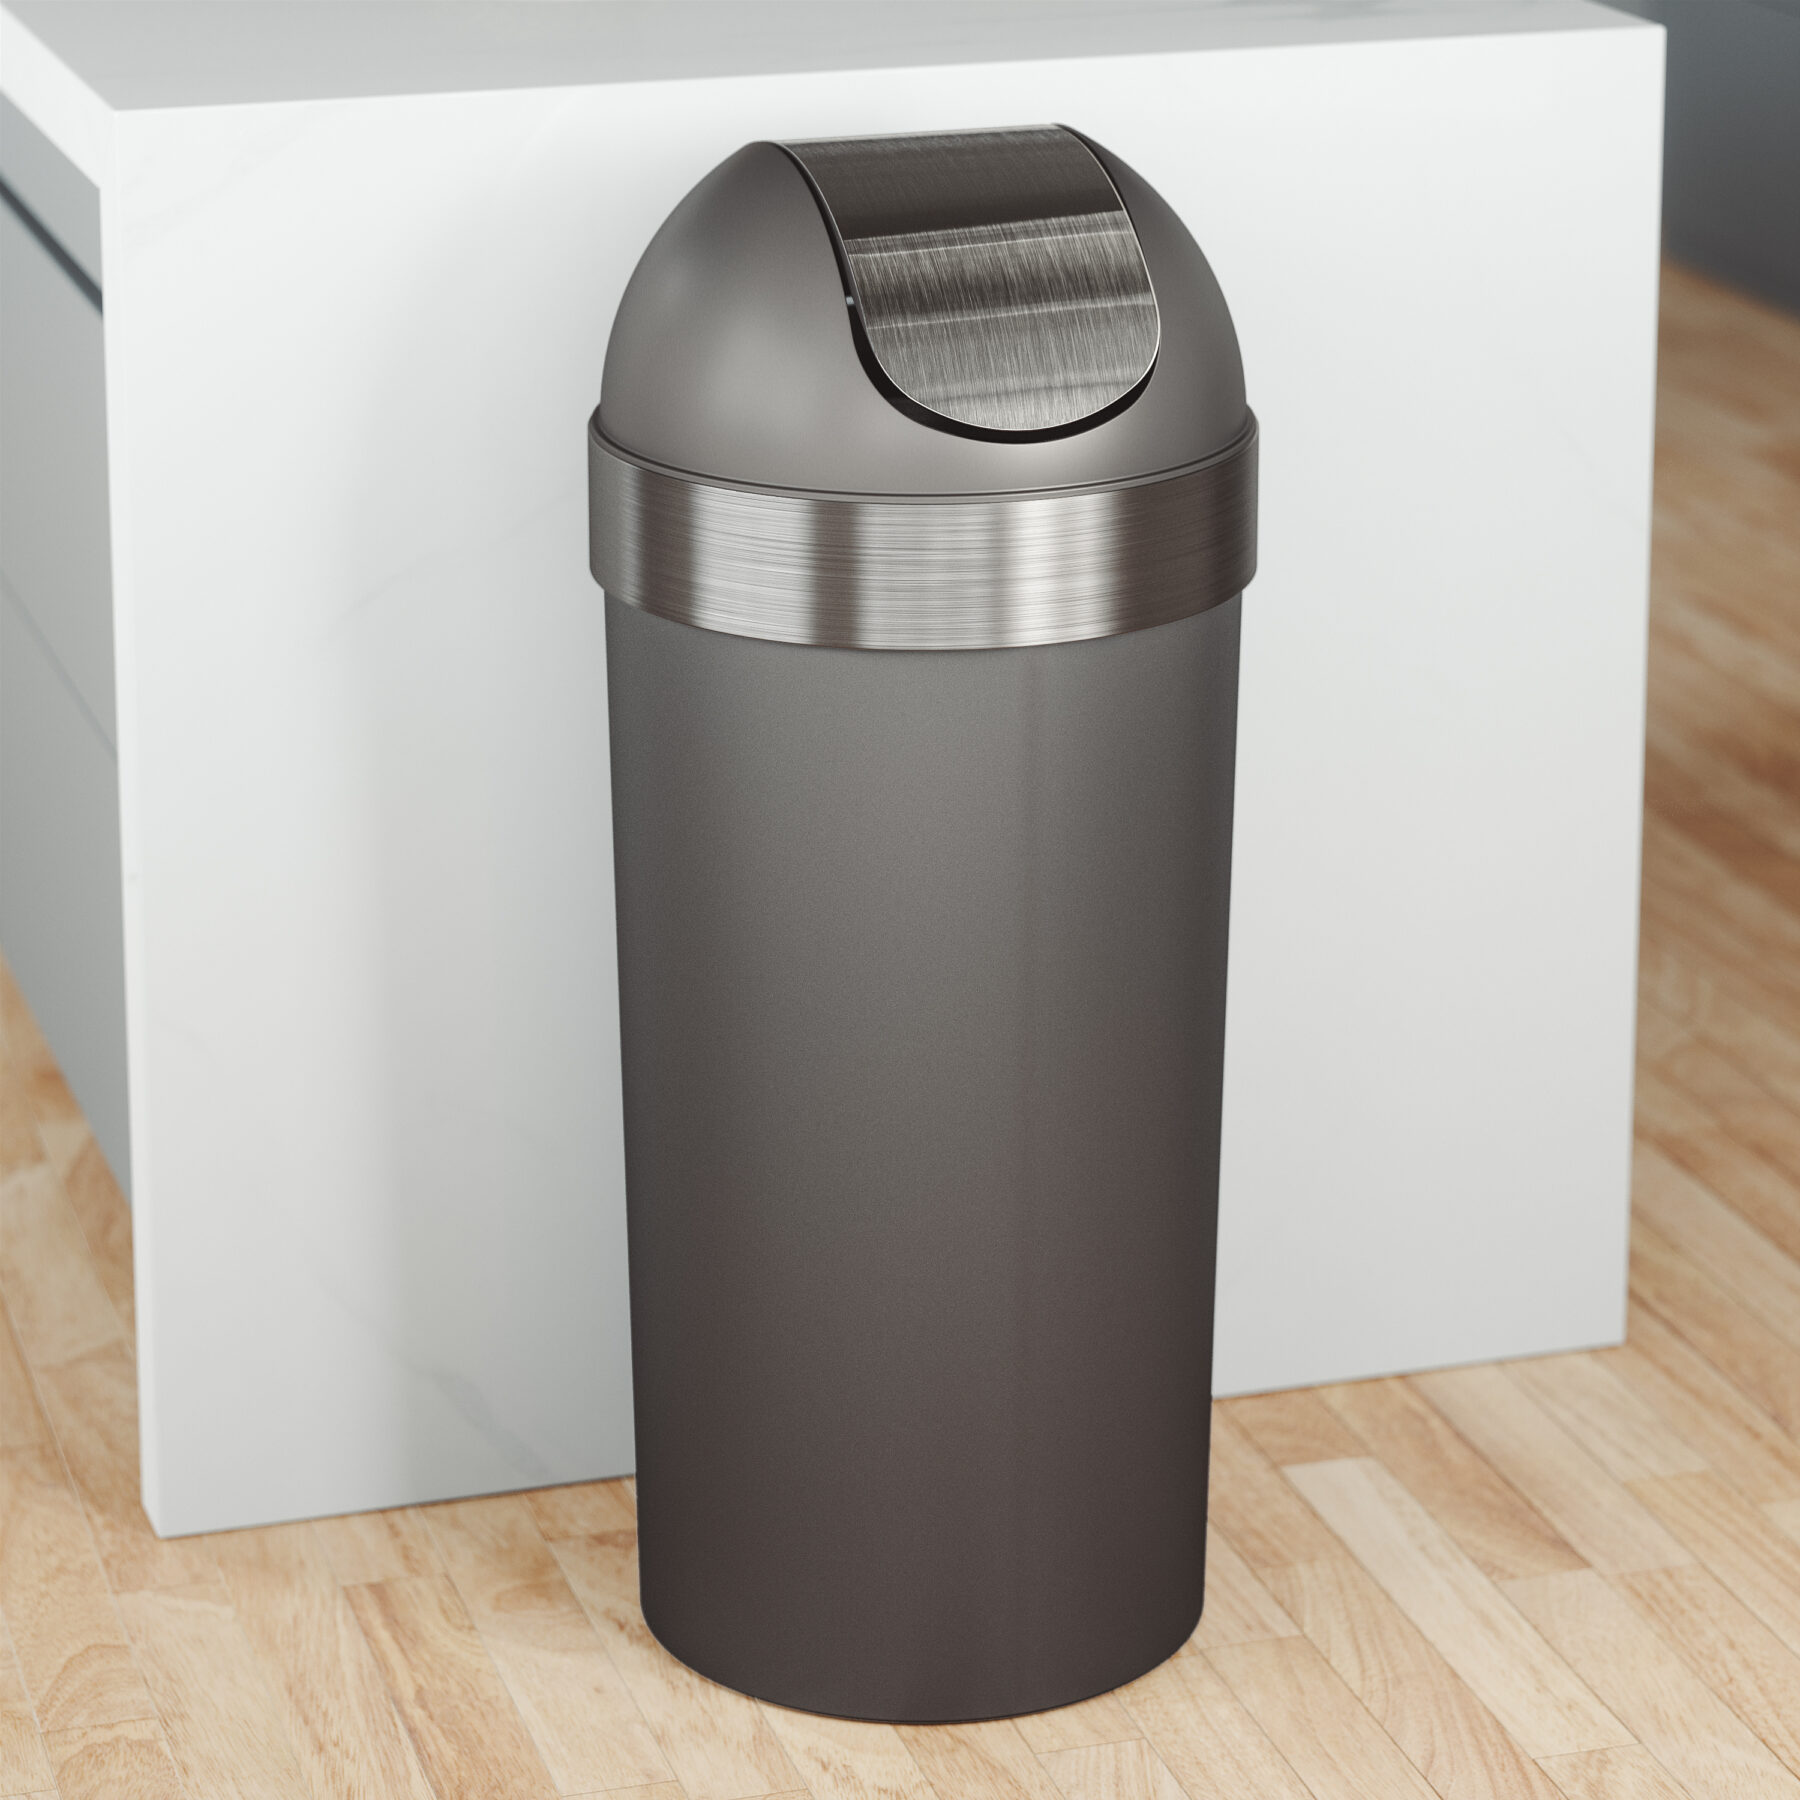 easy-to-use garbage can. With sleek brushed metallic accents